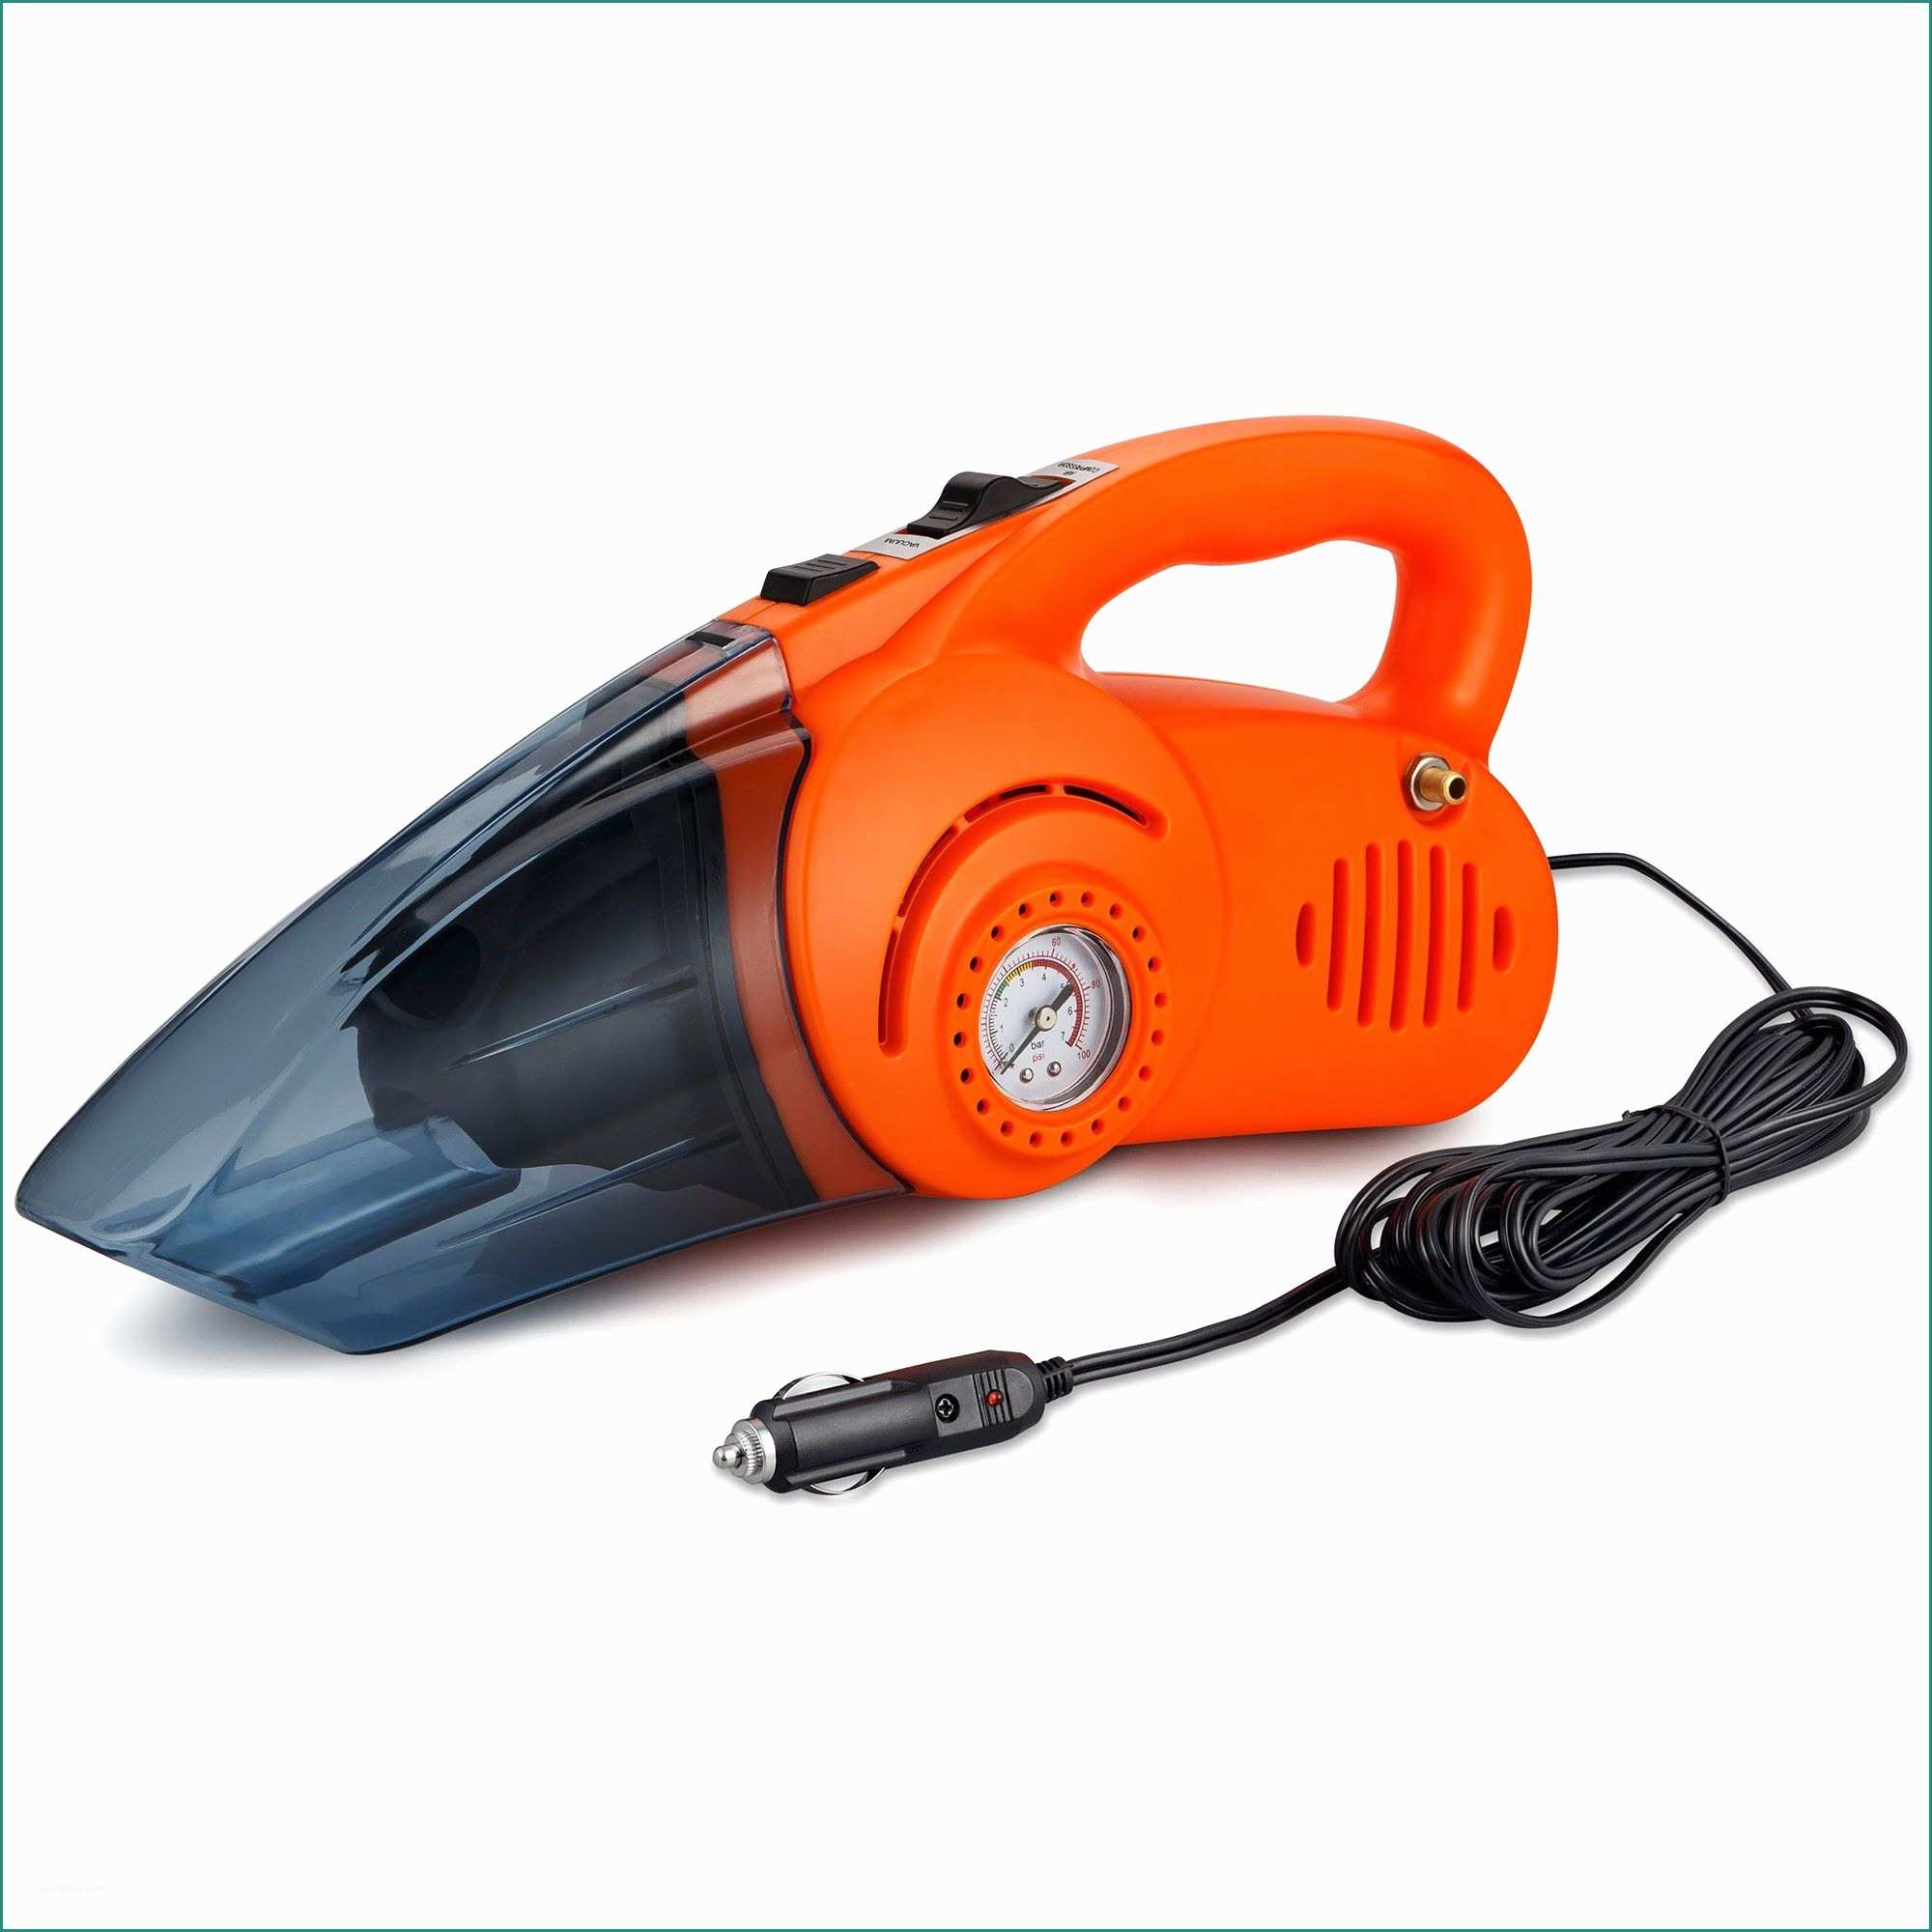 Black and Decker Steam Mop Opinioni E Car Vacuum Cleaner and Air Pressor From American Builder